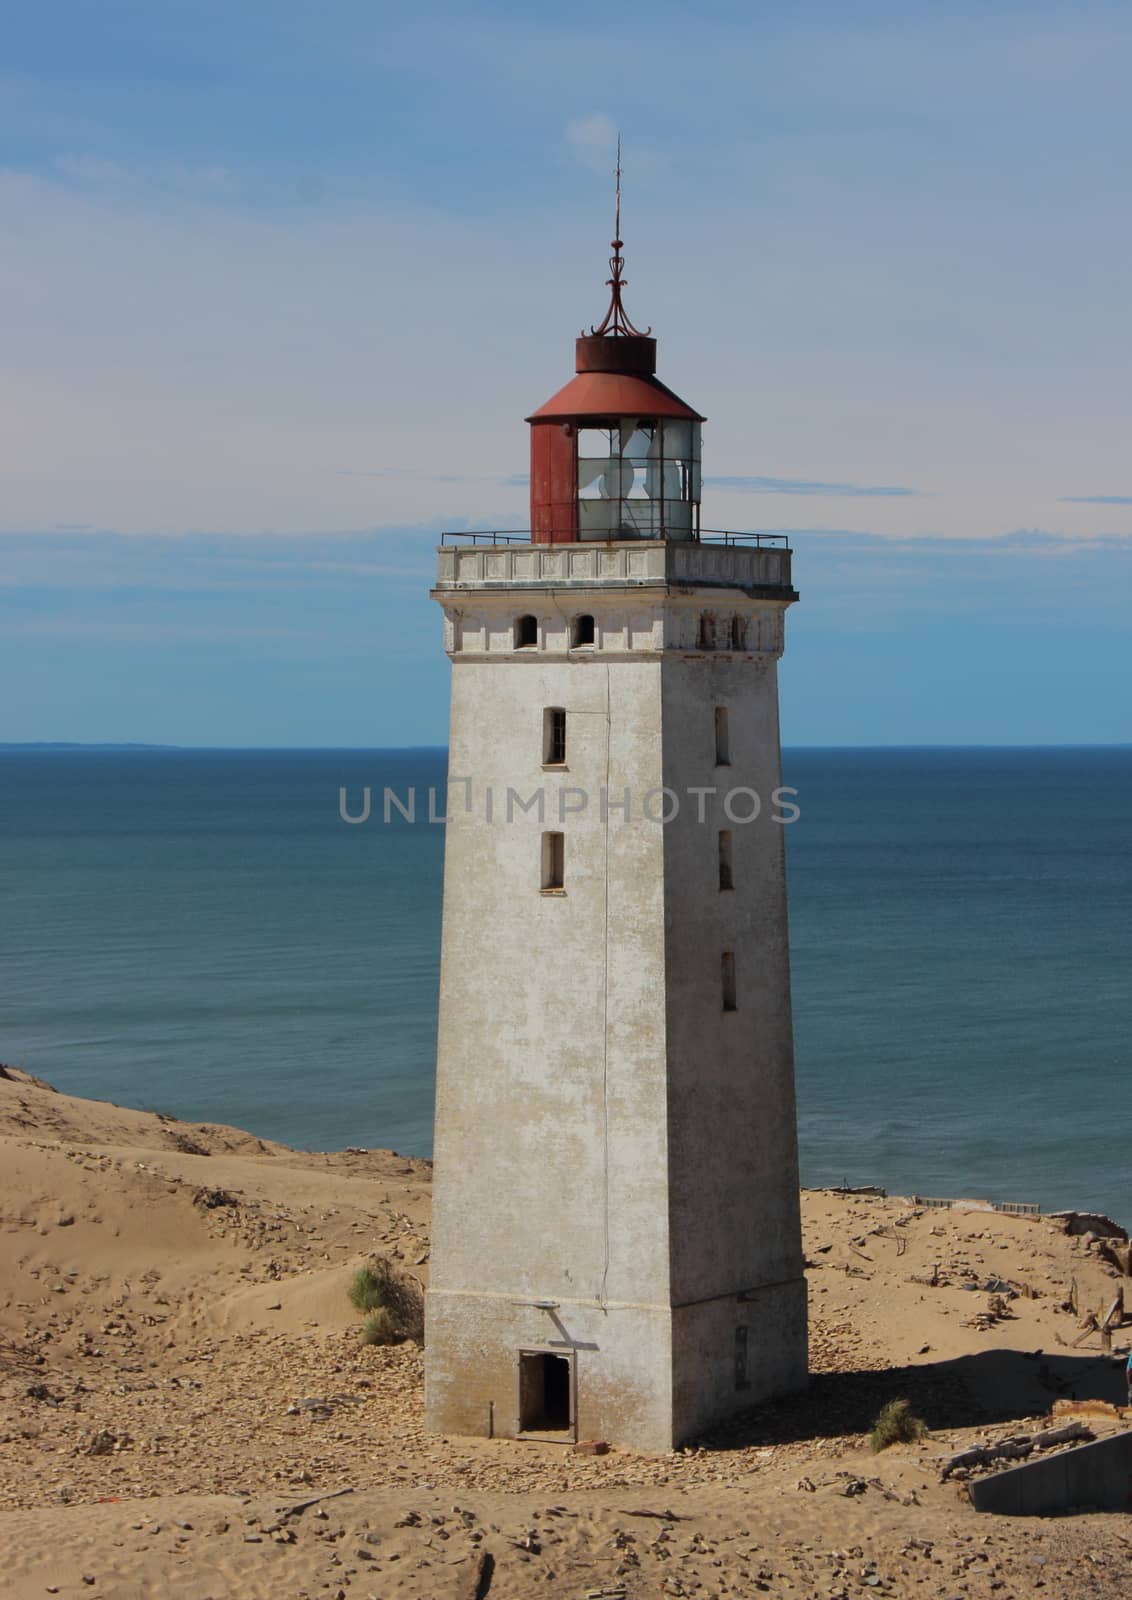 Old Lighthouse and Sand Dune with Ocean in Background by HoleInTheBox